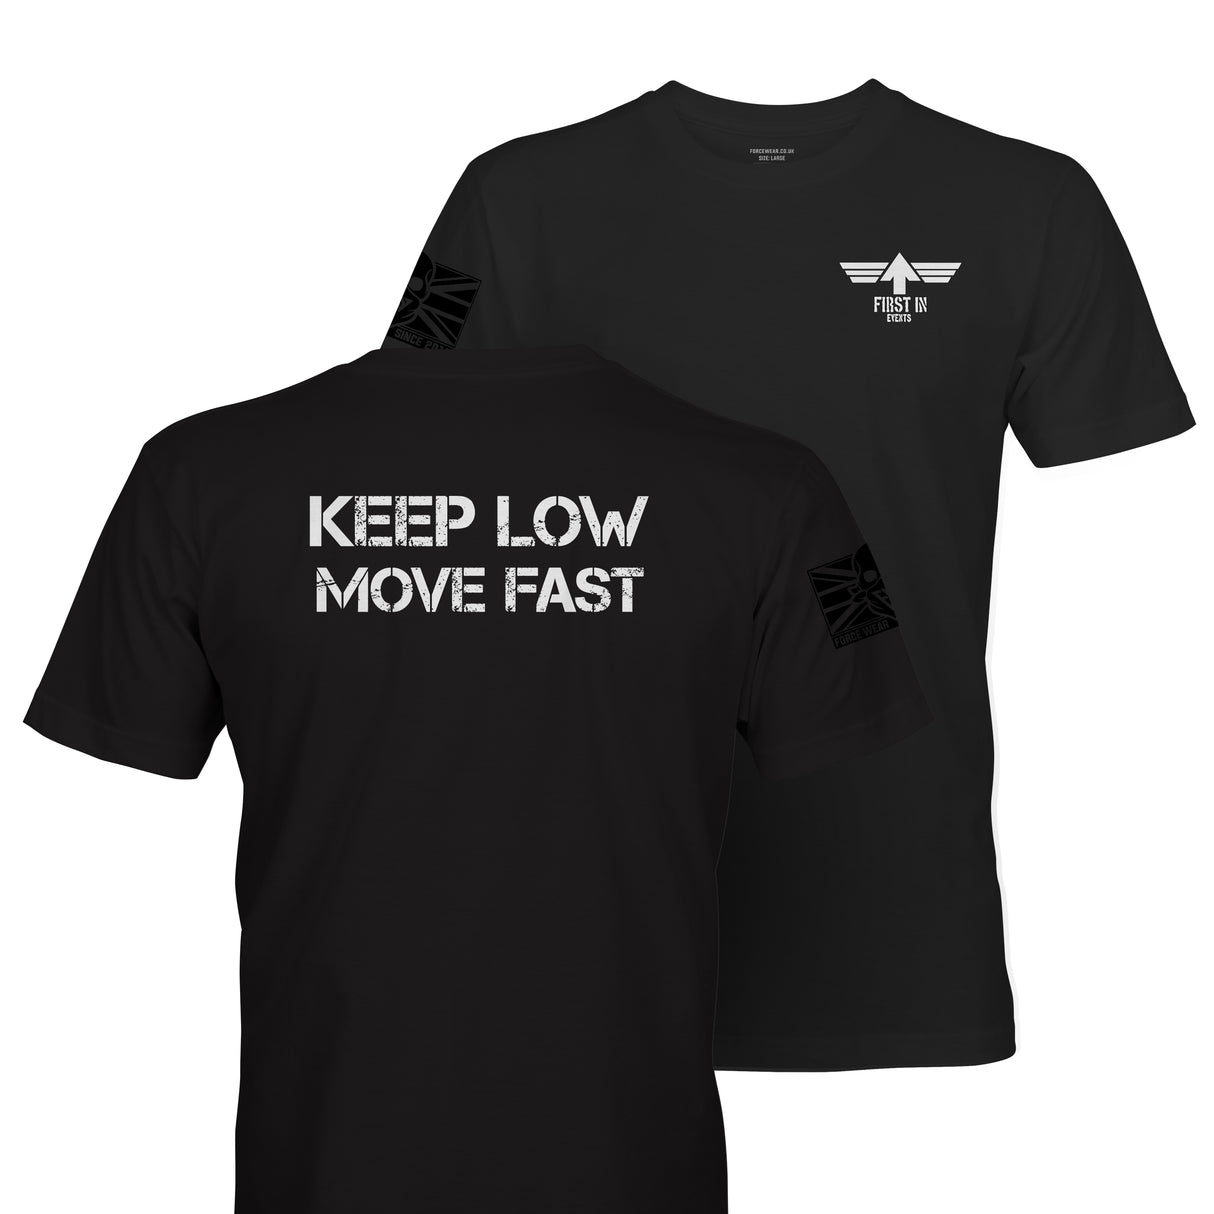 KEEP LOW MOVE FAST WHITE INK TAG & BACK